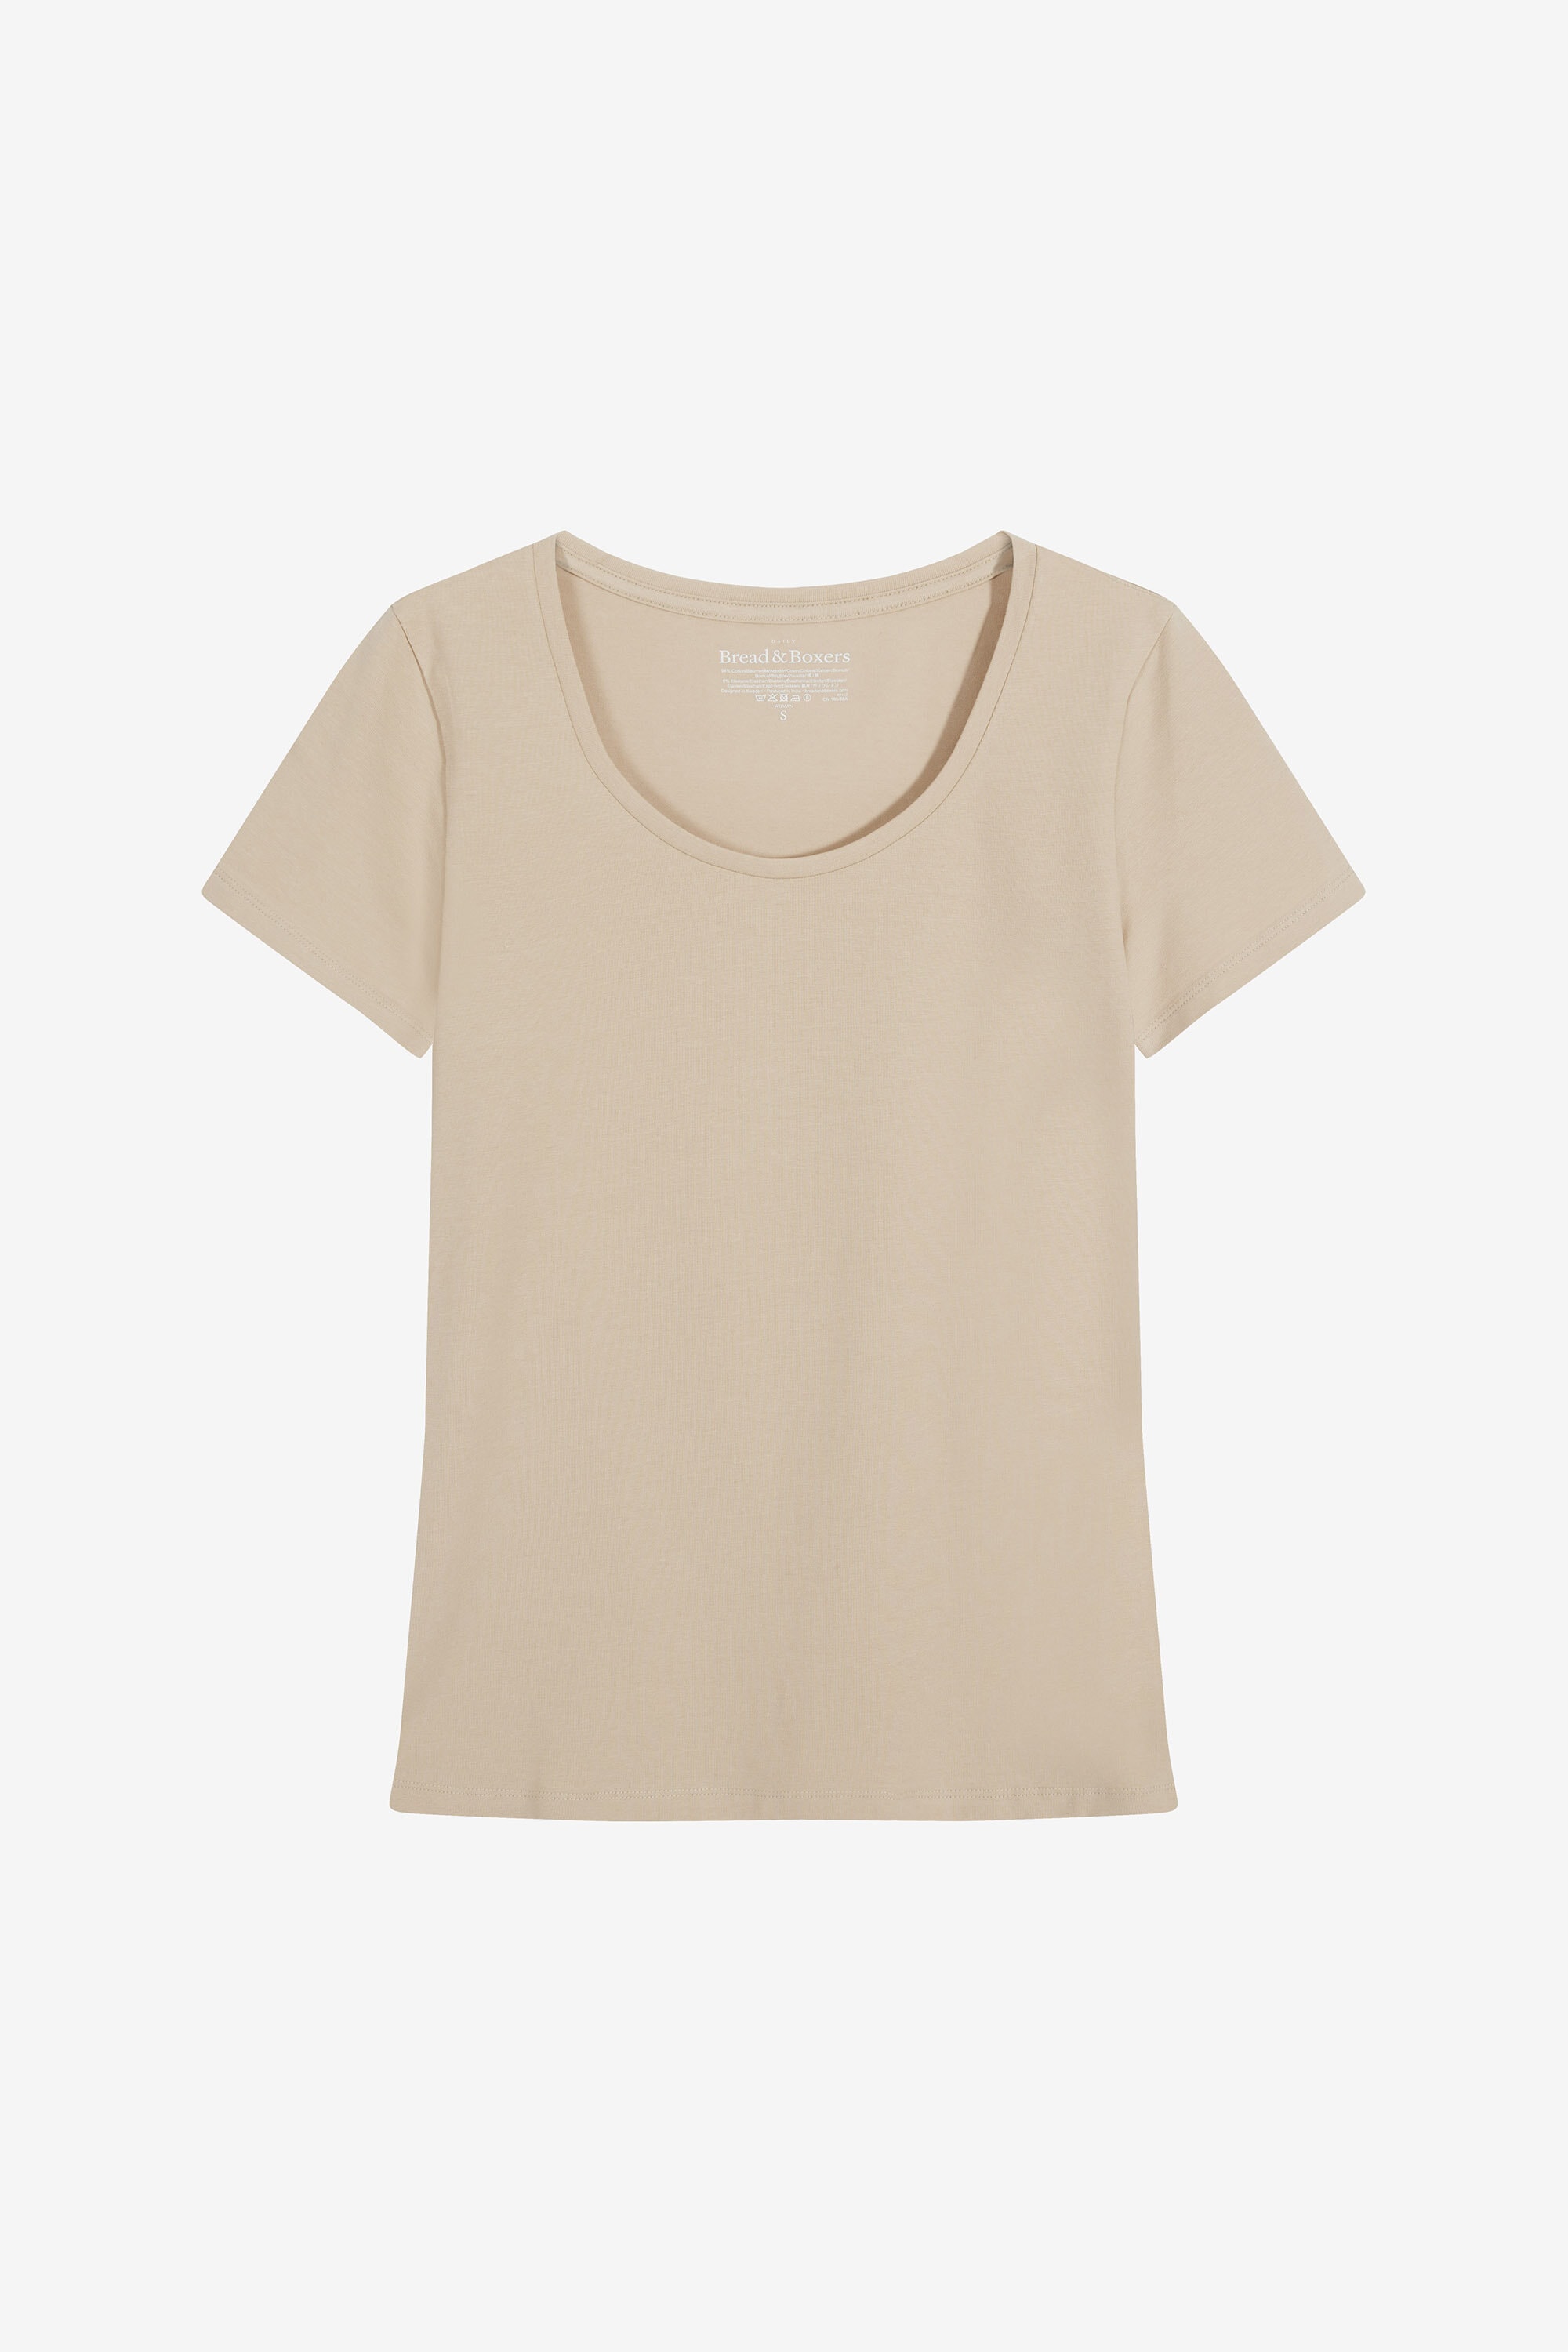 Beige T-shirt for women with round neck made of organic cotton and